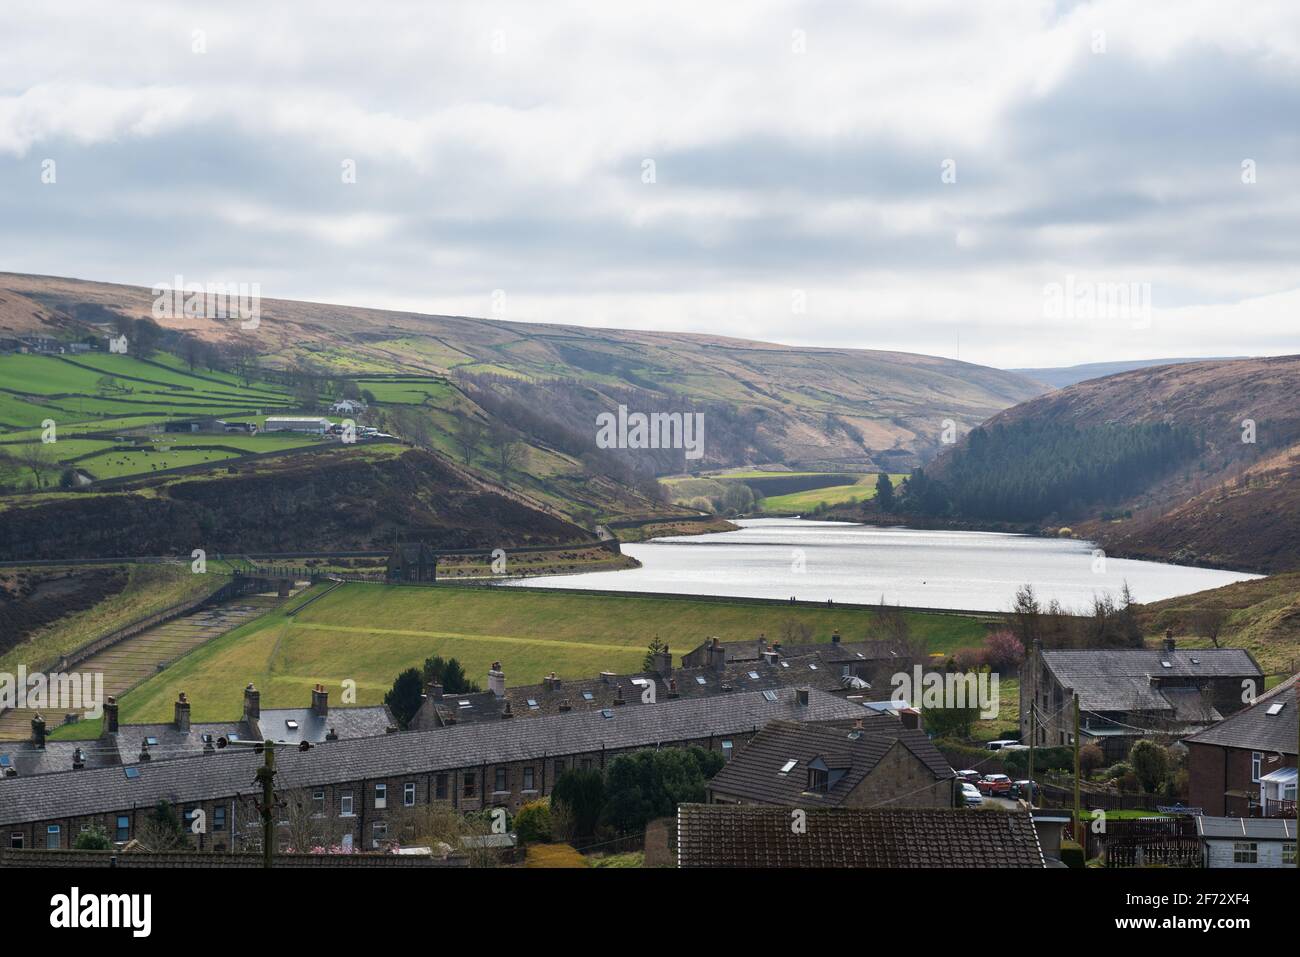 view of Butterley Reservoir and surrounding hills near Marsden in the Yorkshire pennine hills Stock Photo